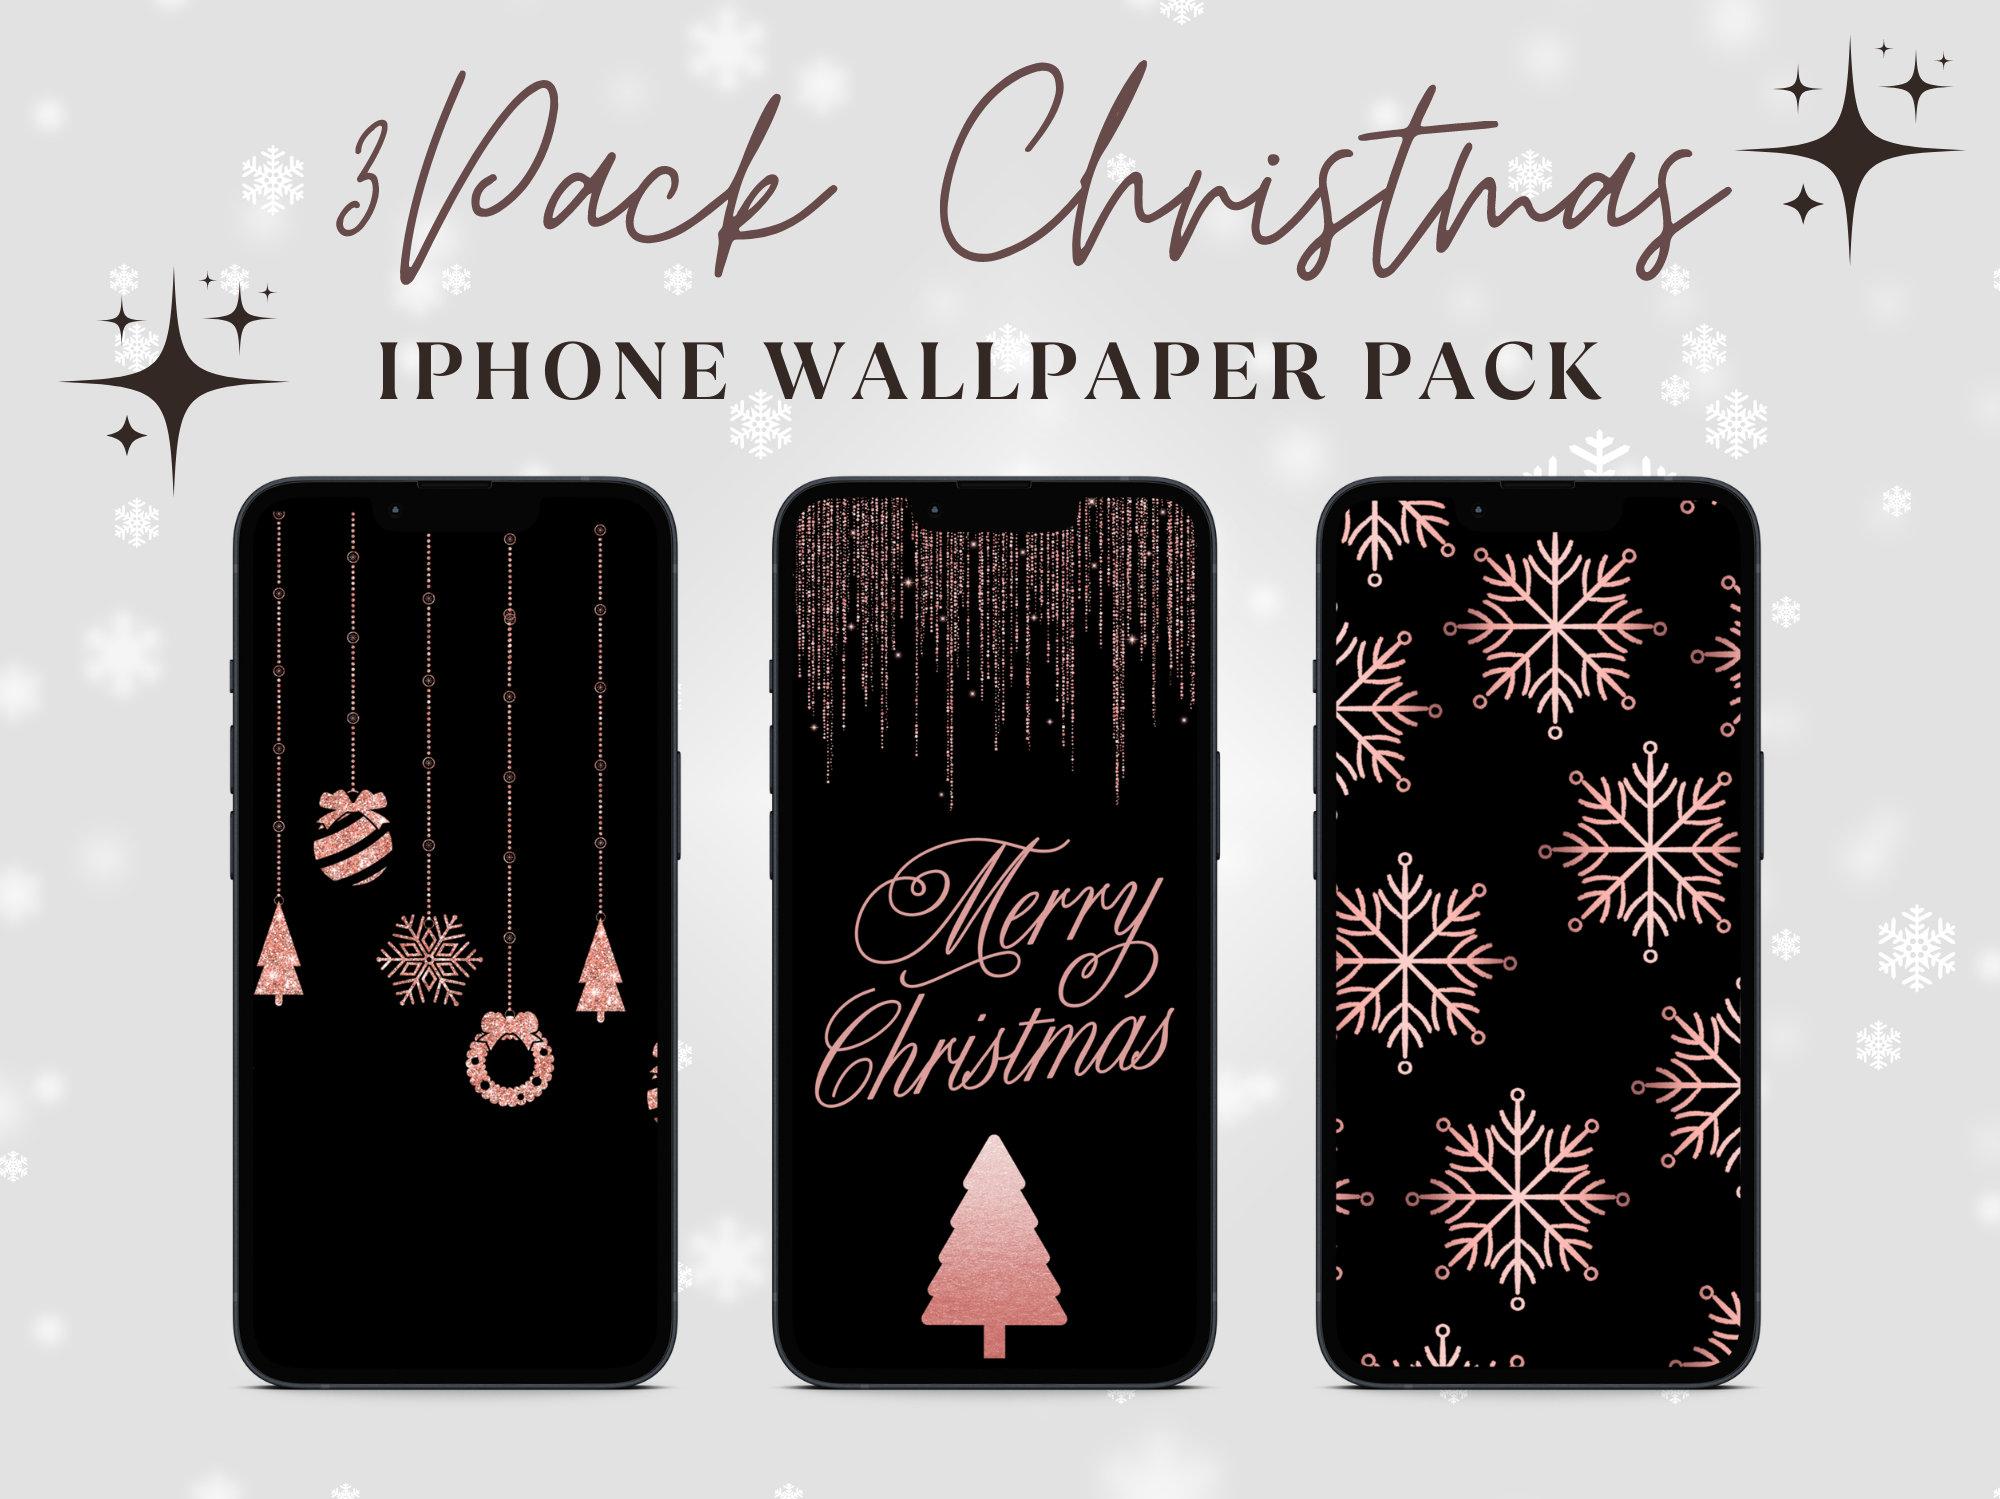 Christmas Apple iPhone Wallpapers Pack of Christmas iPhone